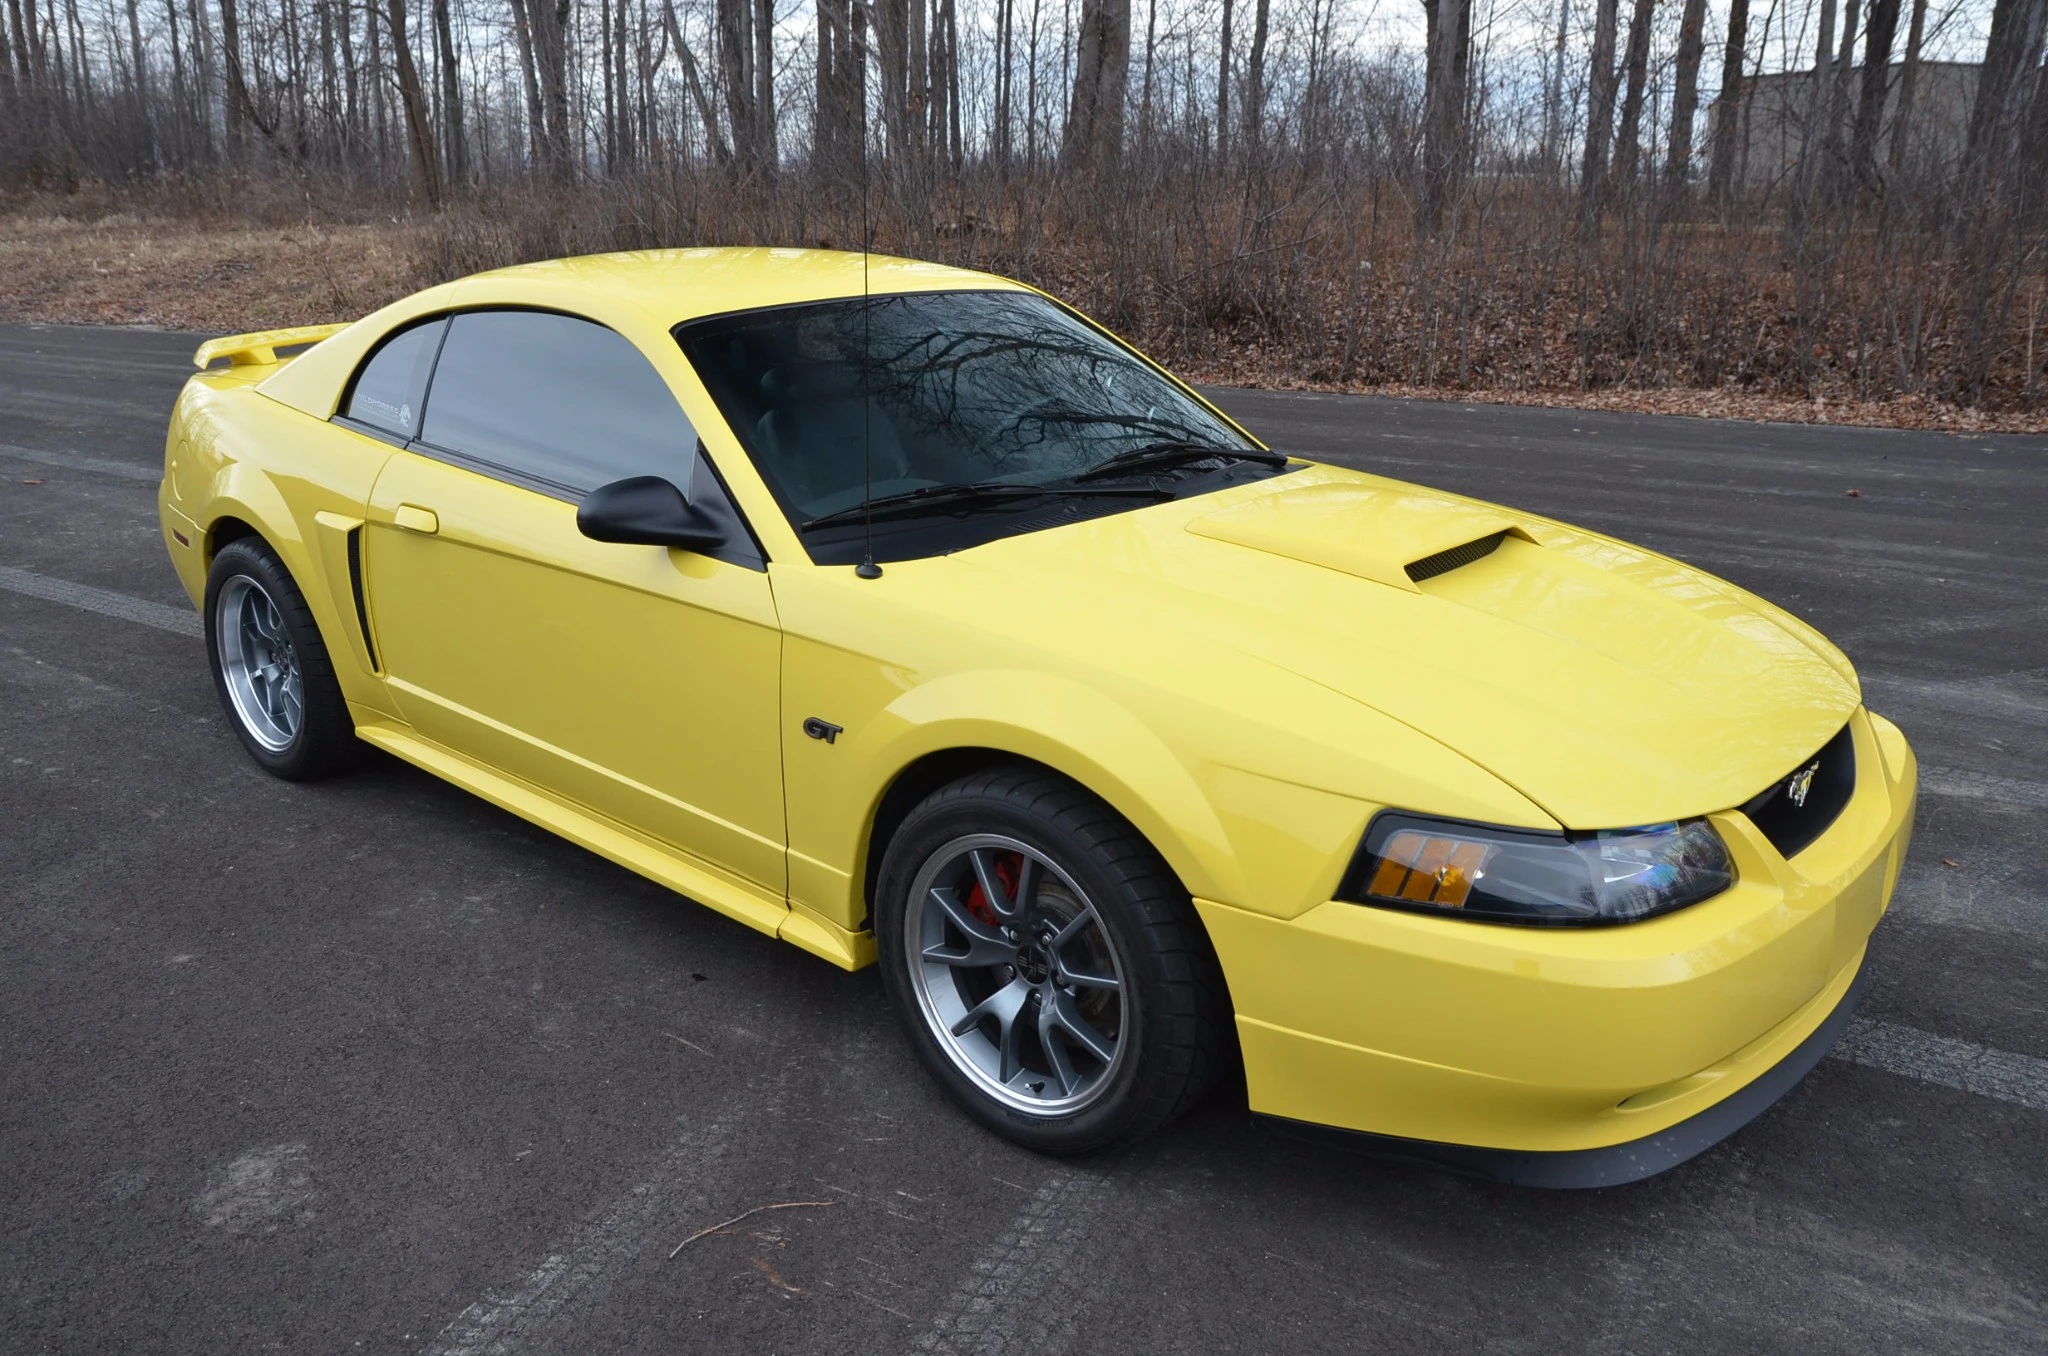 Mustang Of The Day: 2001 Ford Mustang GT